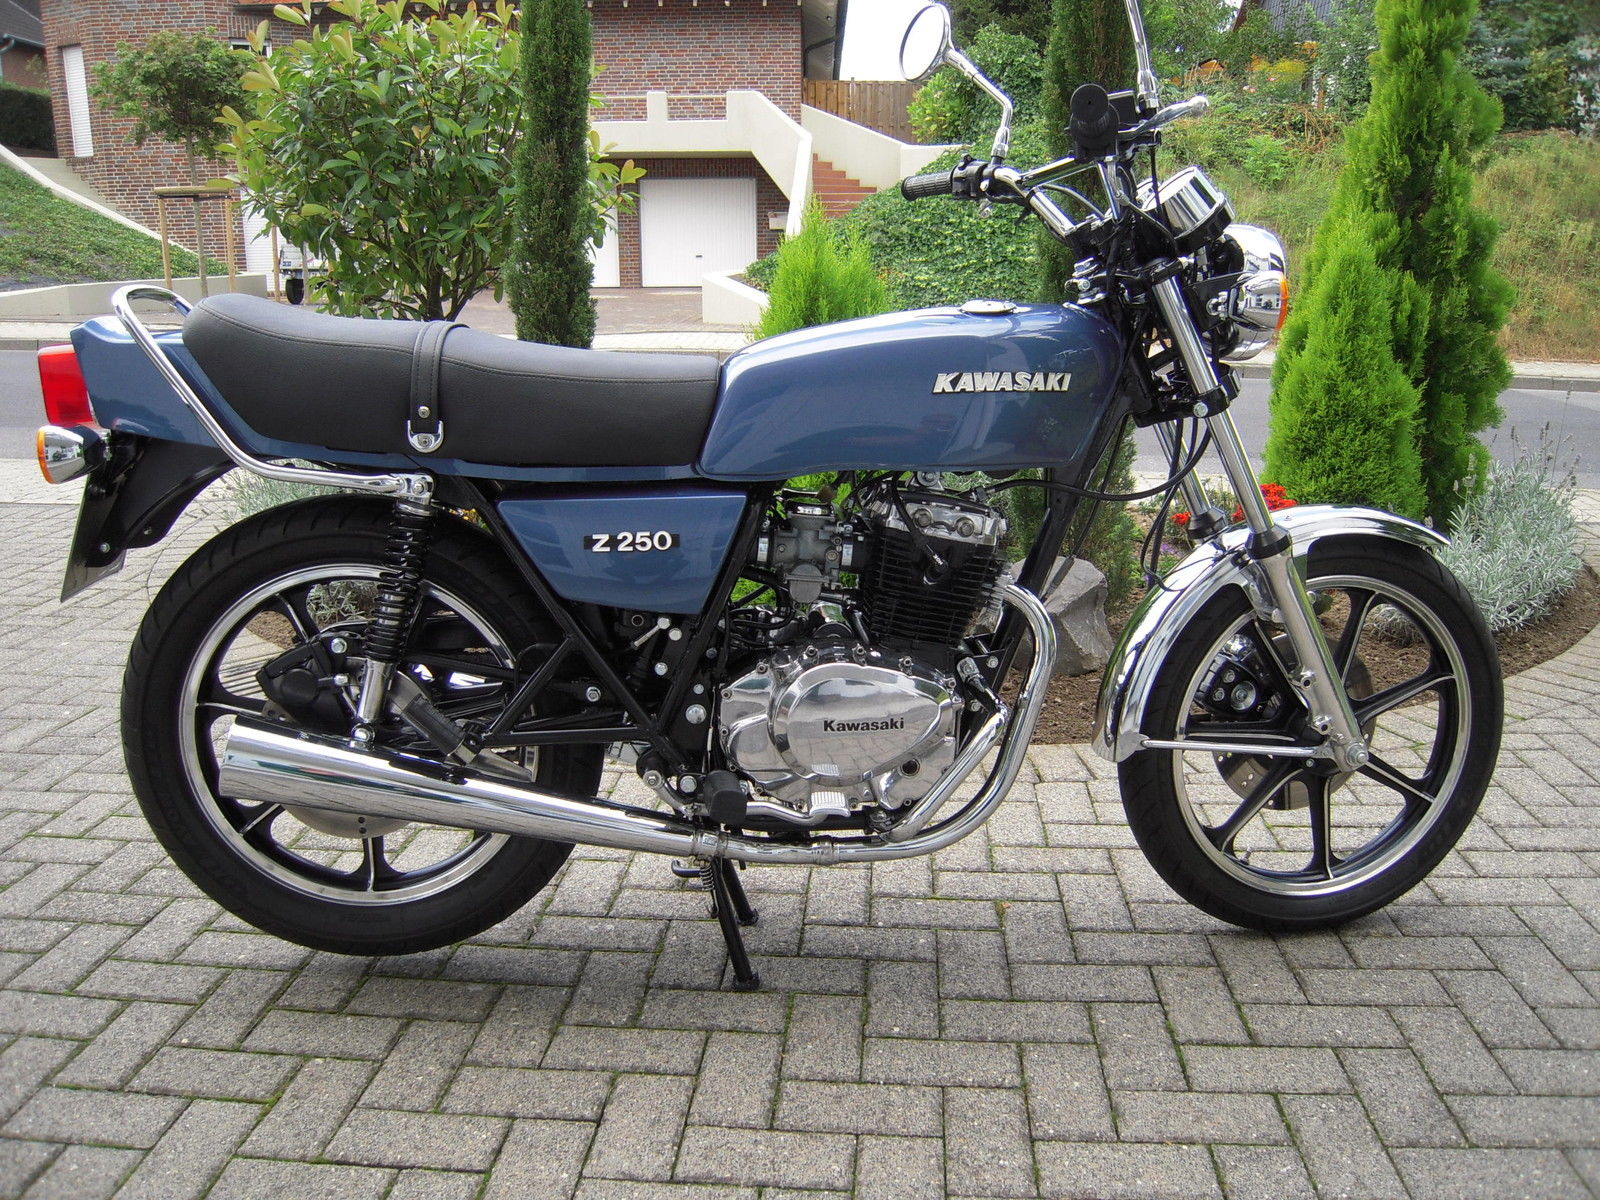 Kawasaki Z250 - 1980 - Right Side View, Gas Tank, Side Panel, Seat and Strap.